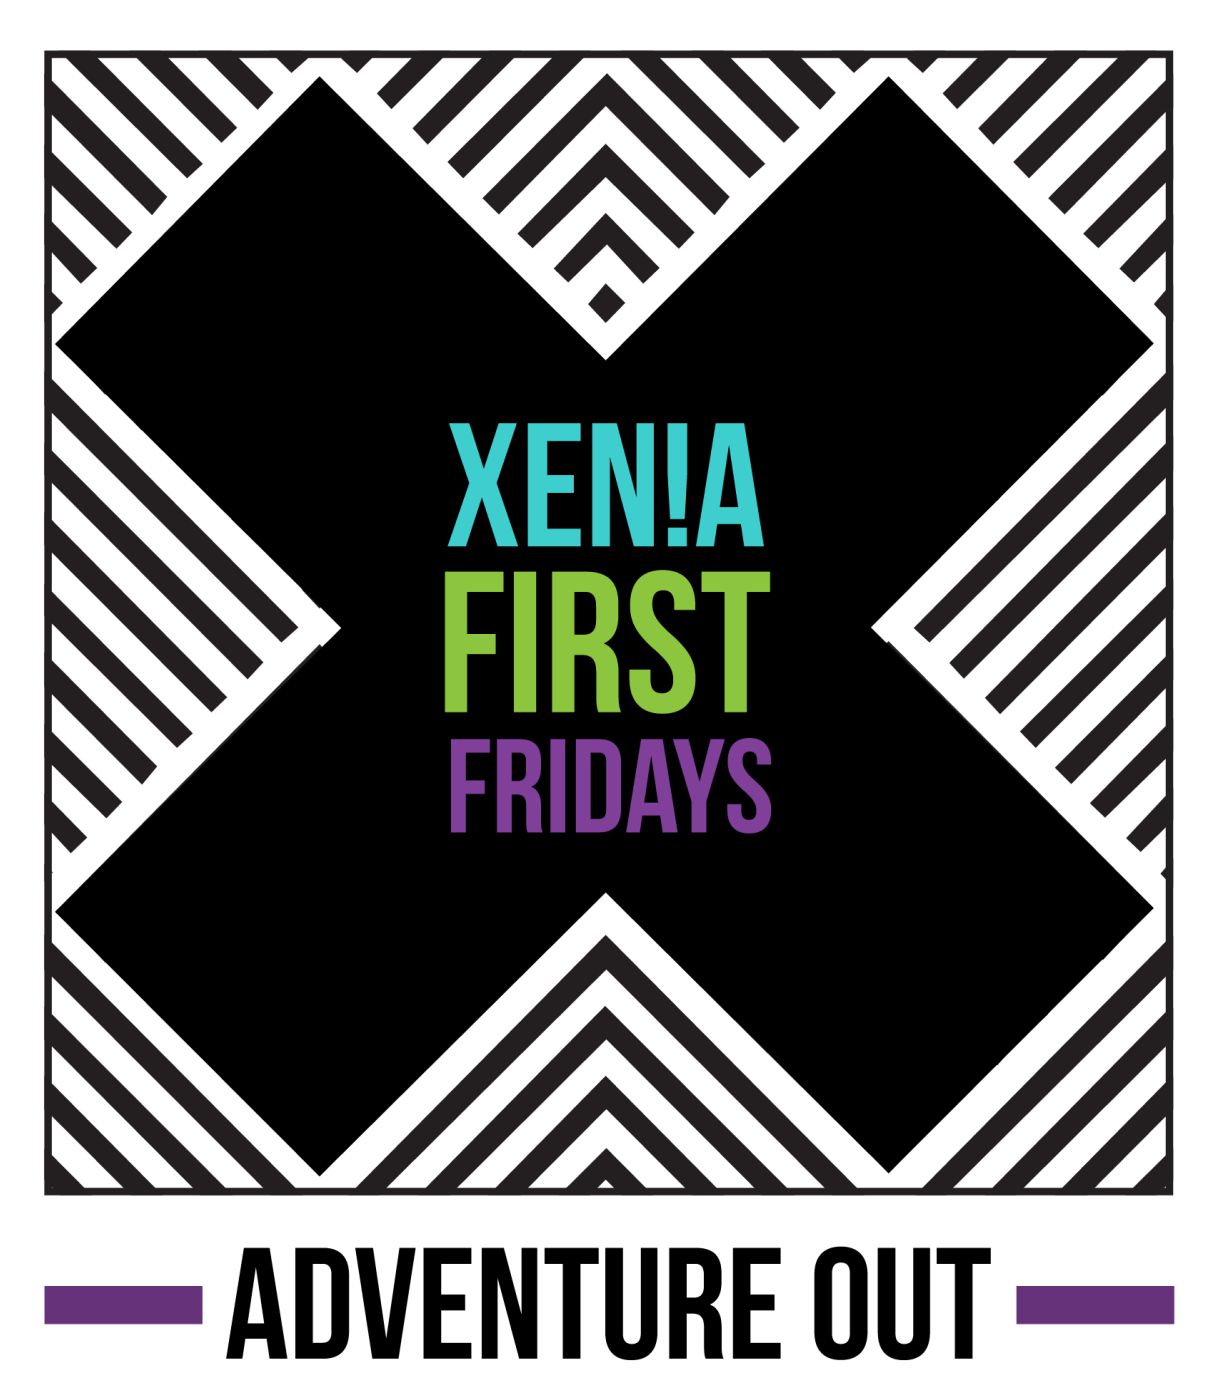 Xenia is Celebrating July’s First Friday With a Bang! A Spectacular First Friday is Planned for July!